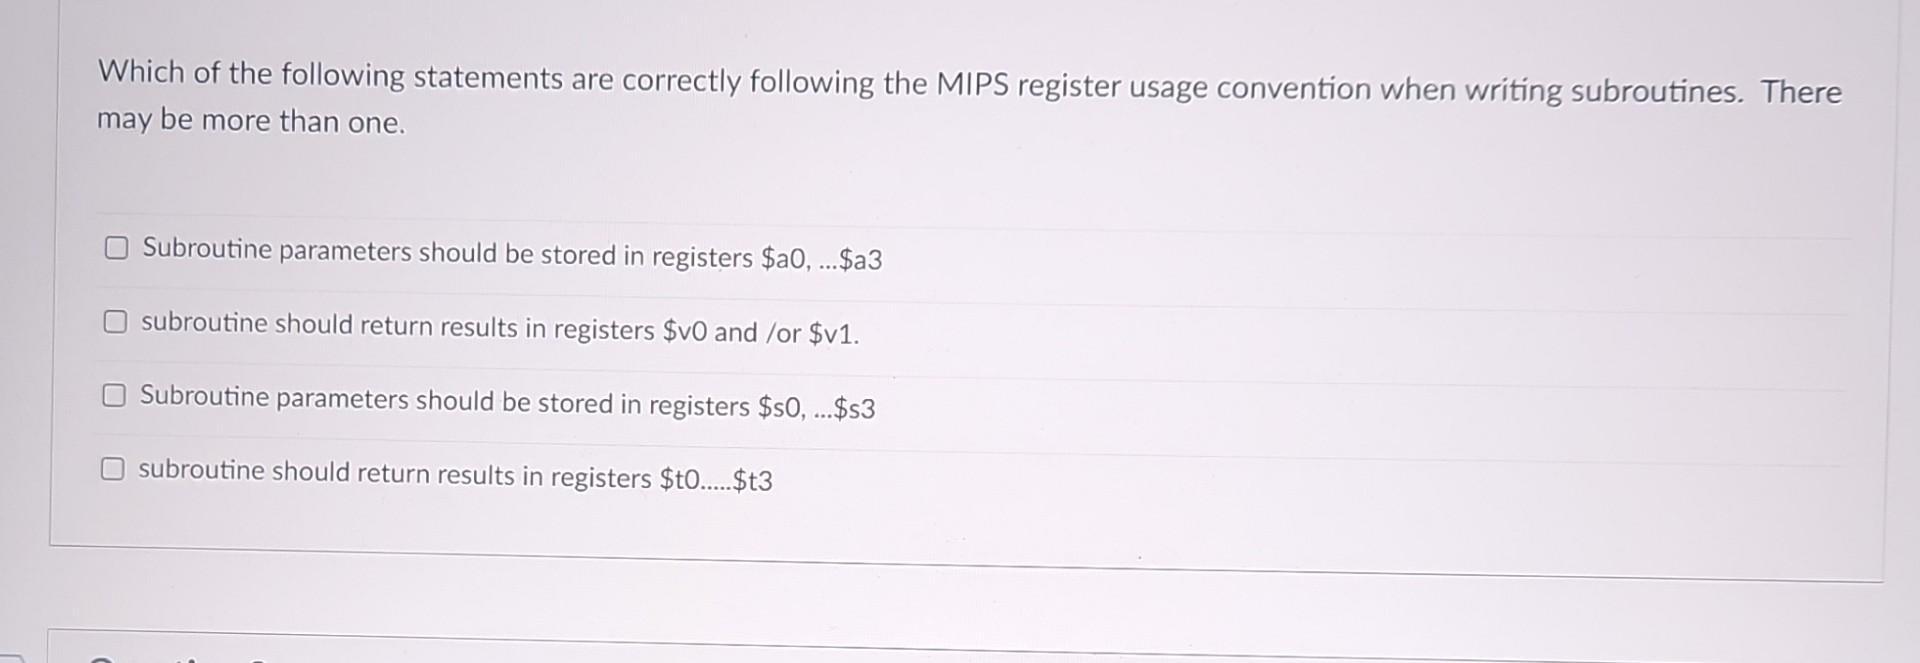 Which of the following statements are correctly following the MIPS register usage convention when writing